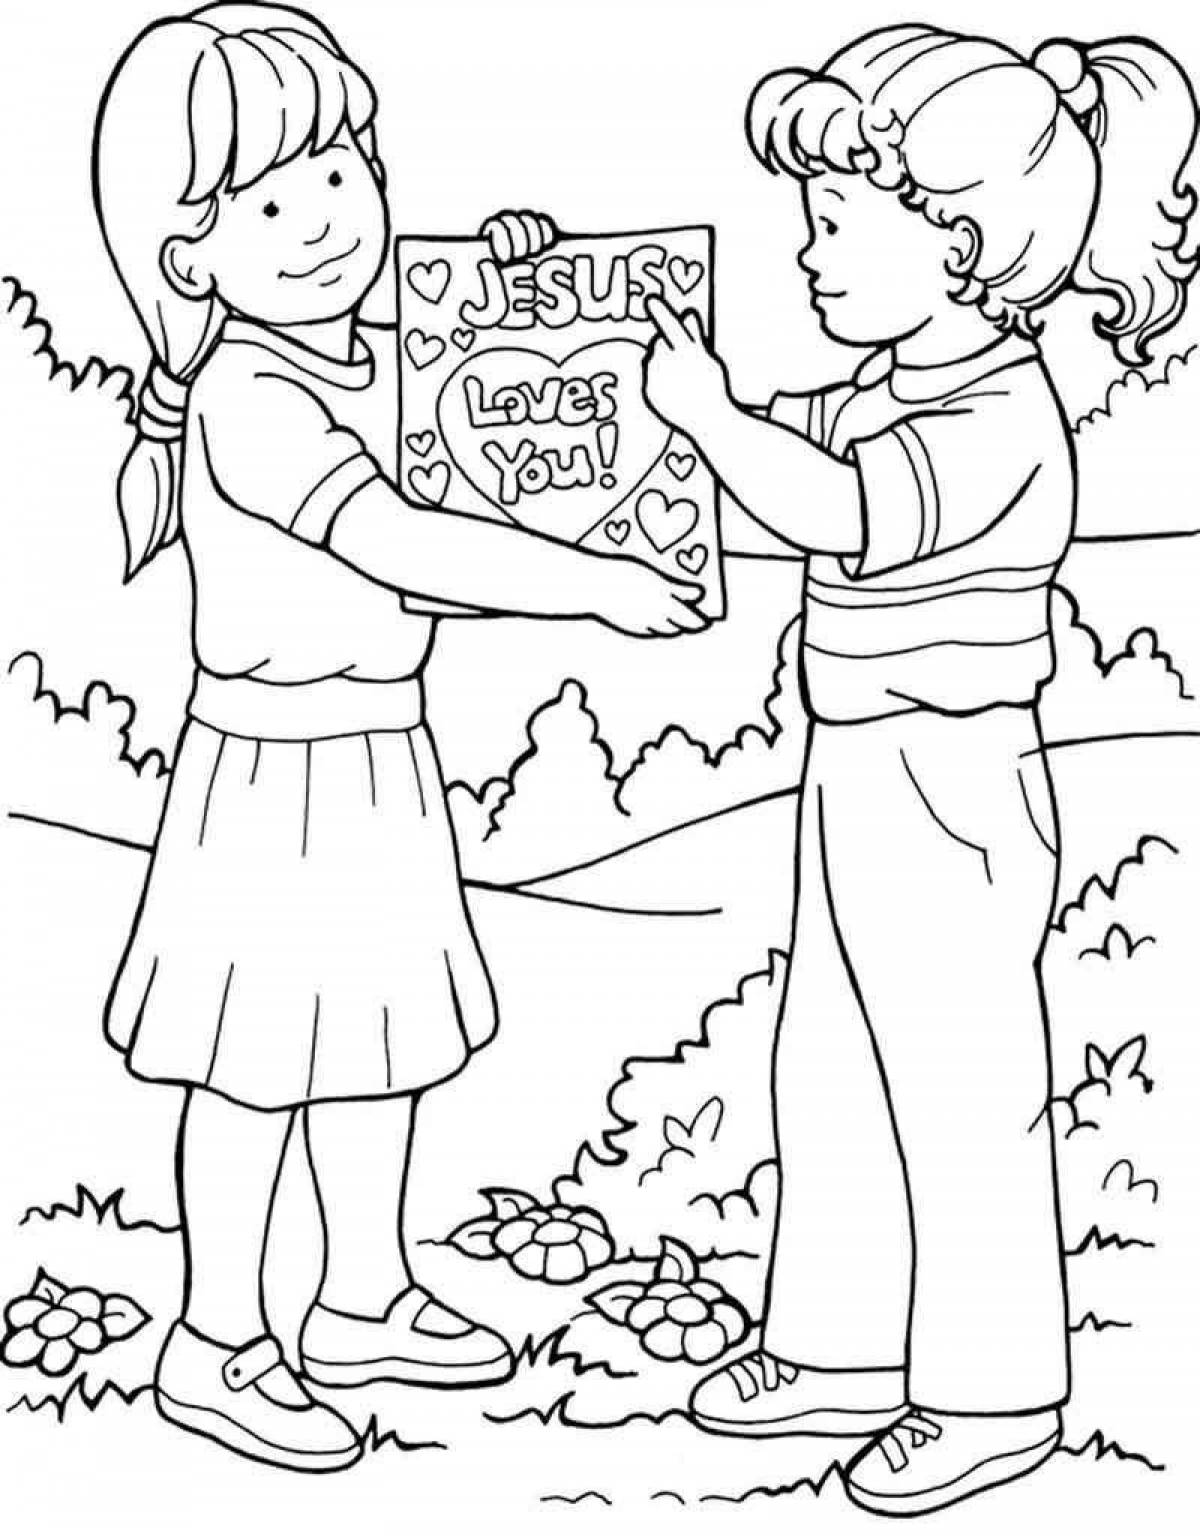 Let's funny coloring pages